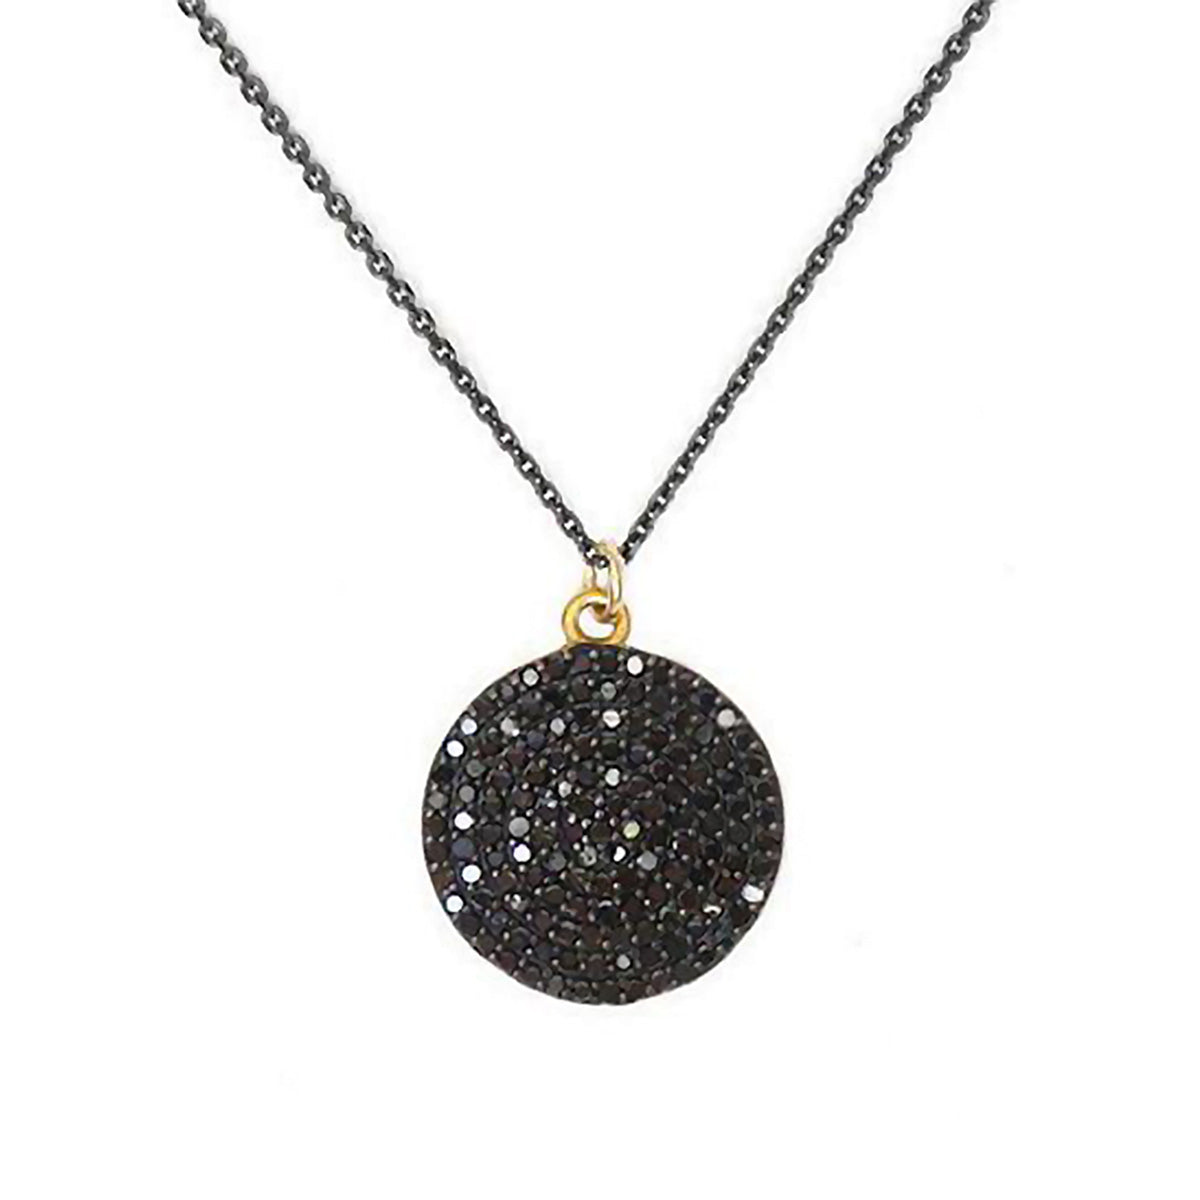 Once in a Blue Moon Black Diamond Necklace